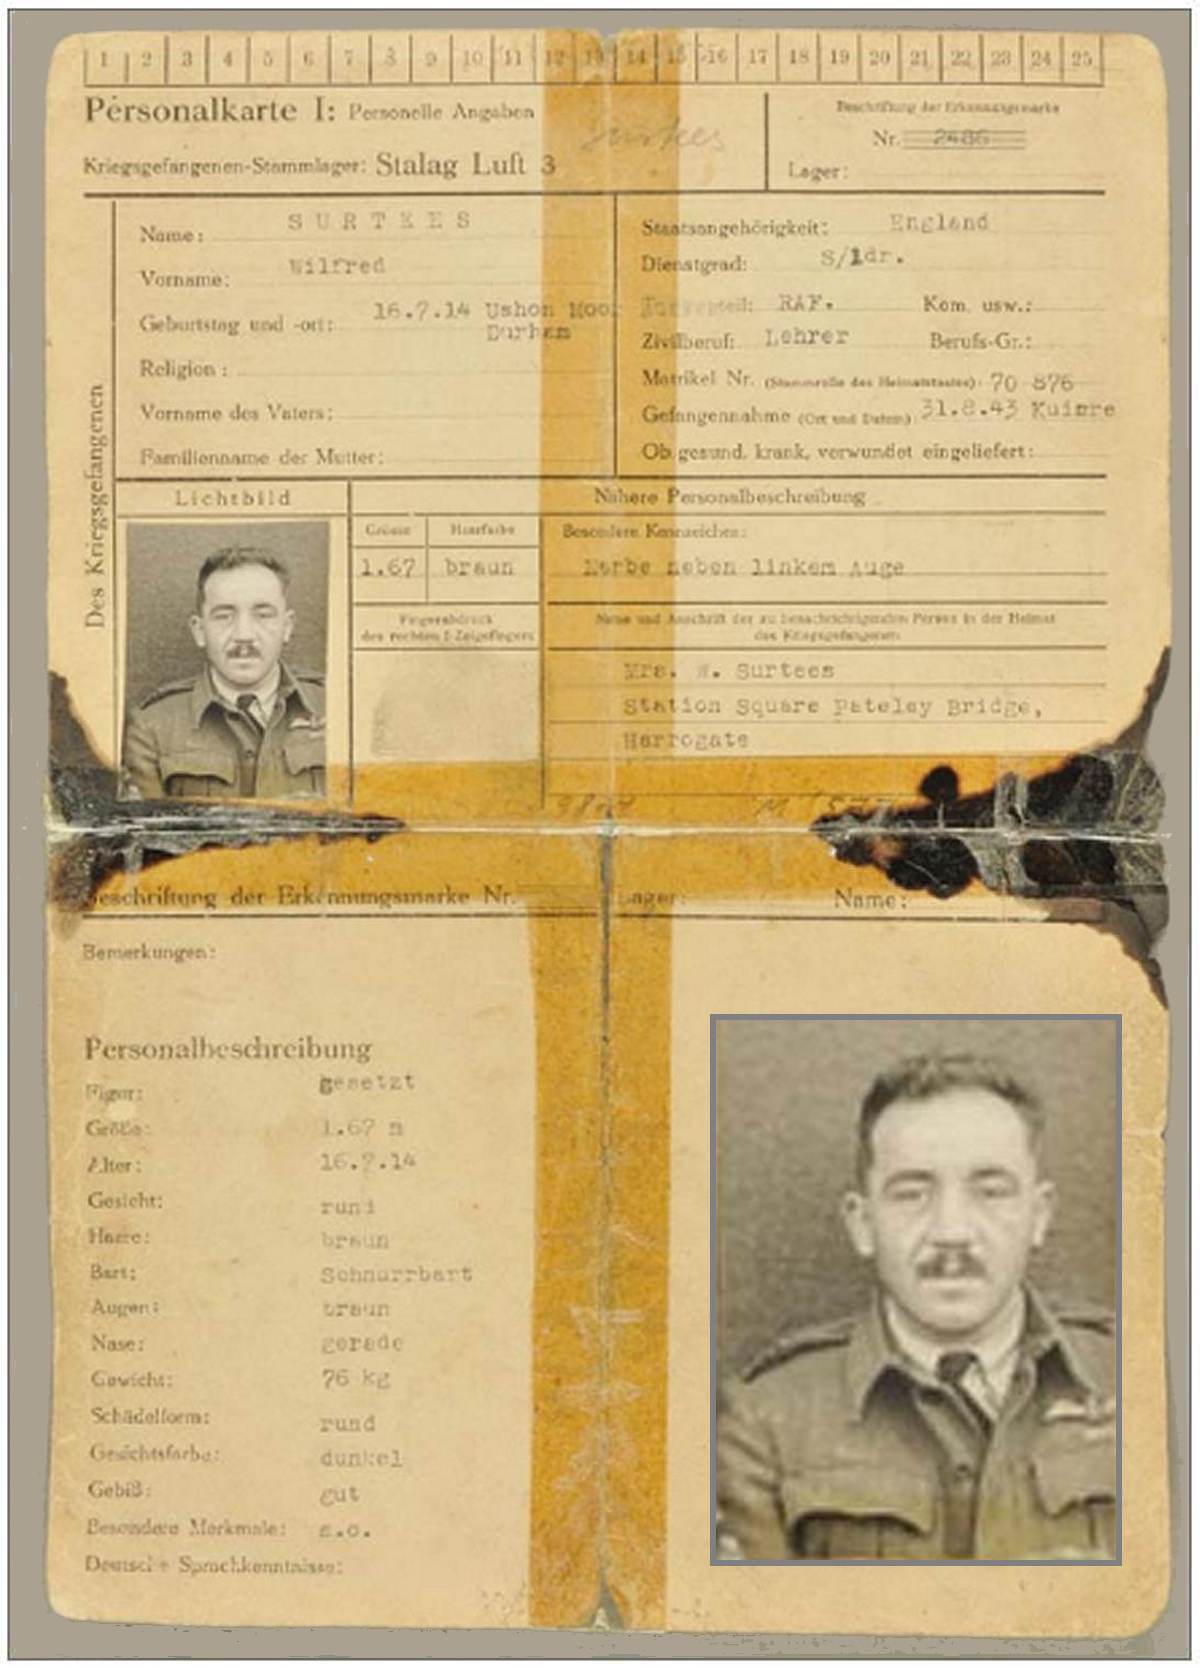 Squadron Leader Rtd. Wilfred 'Butch' Surtees - POW - ID card